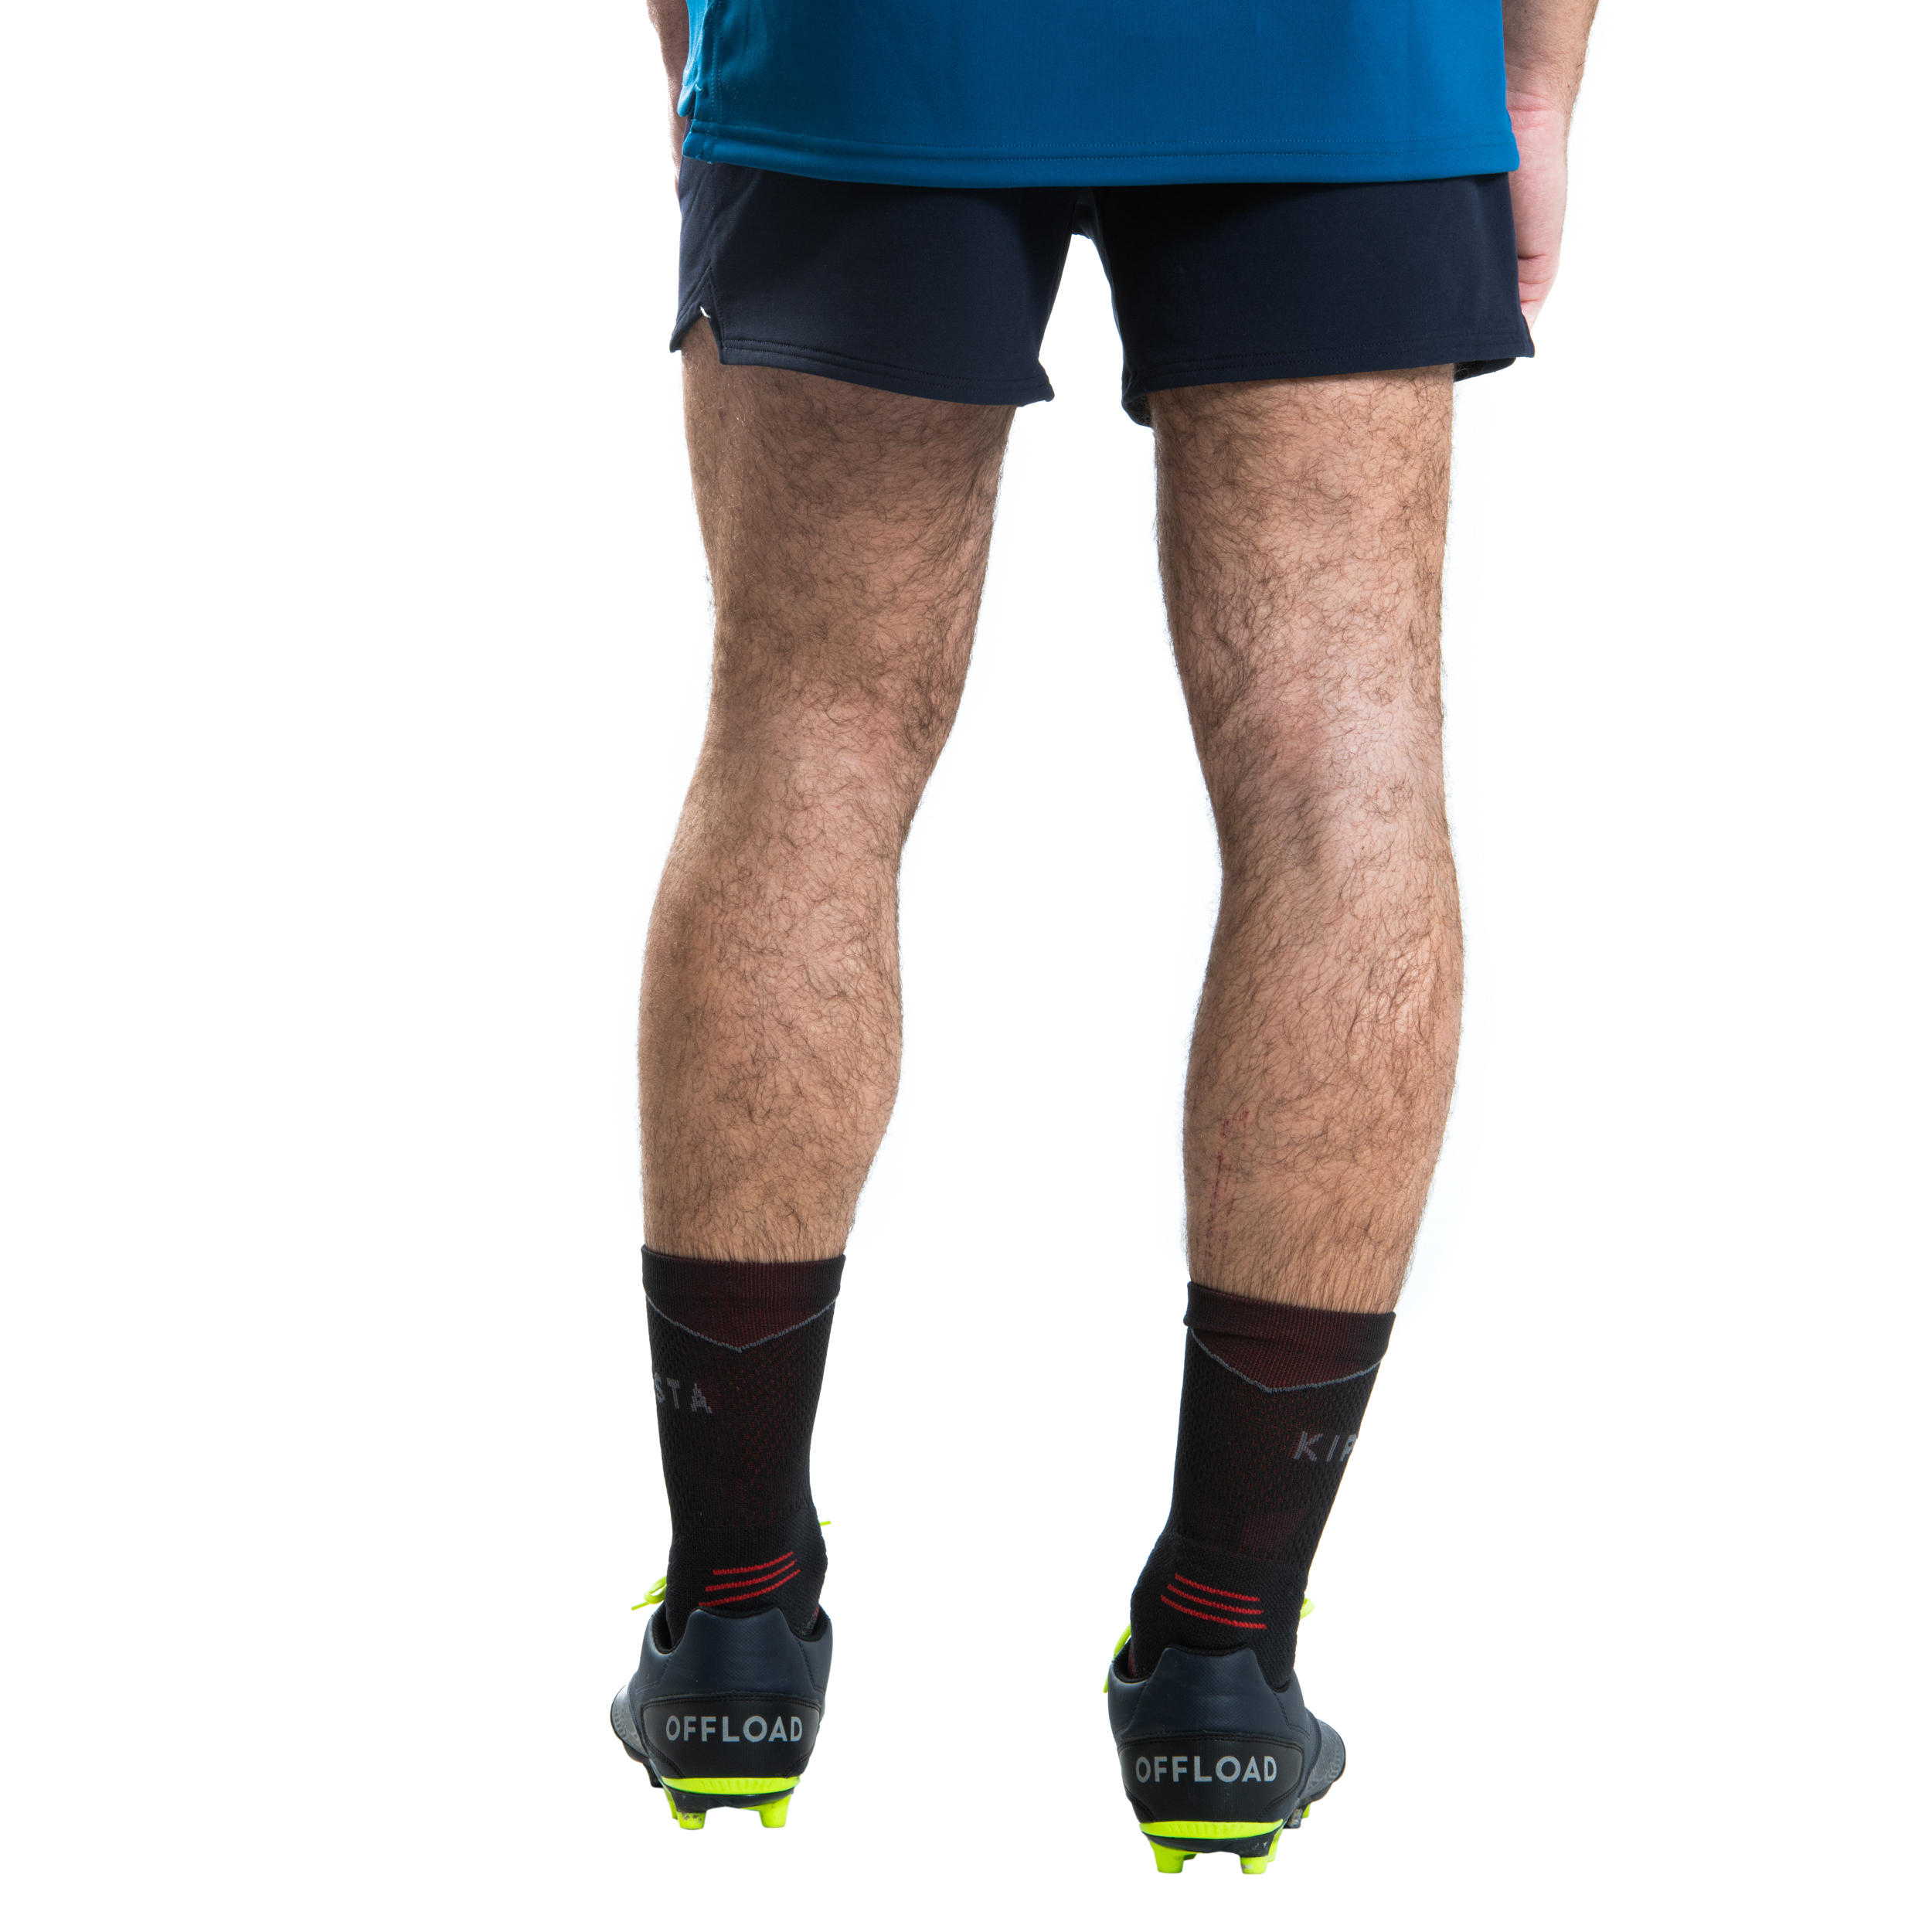 Men's Rugby Shorts R500 - Navy Blue 7/8